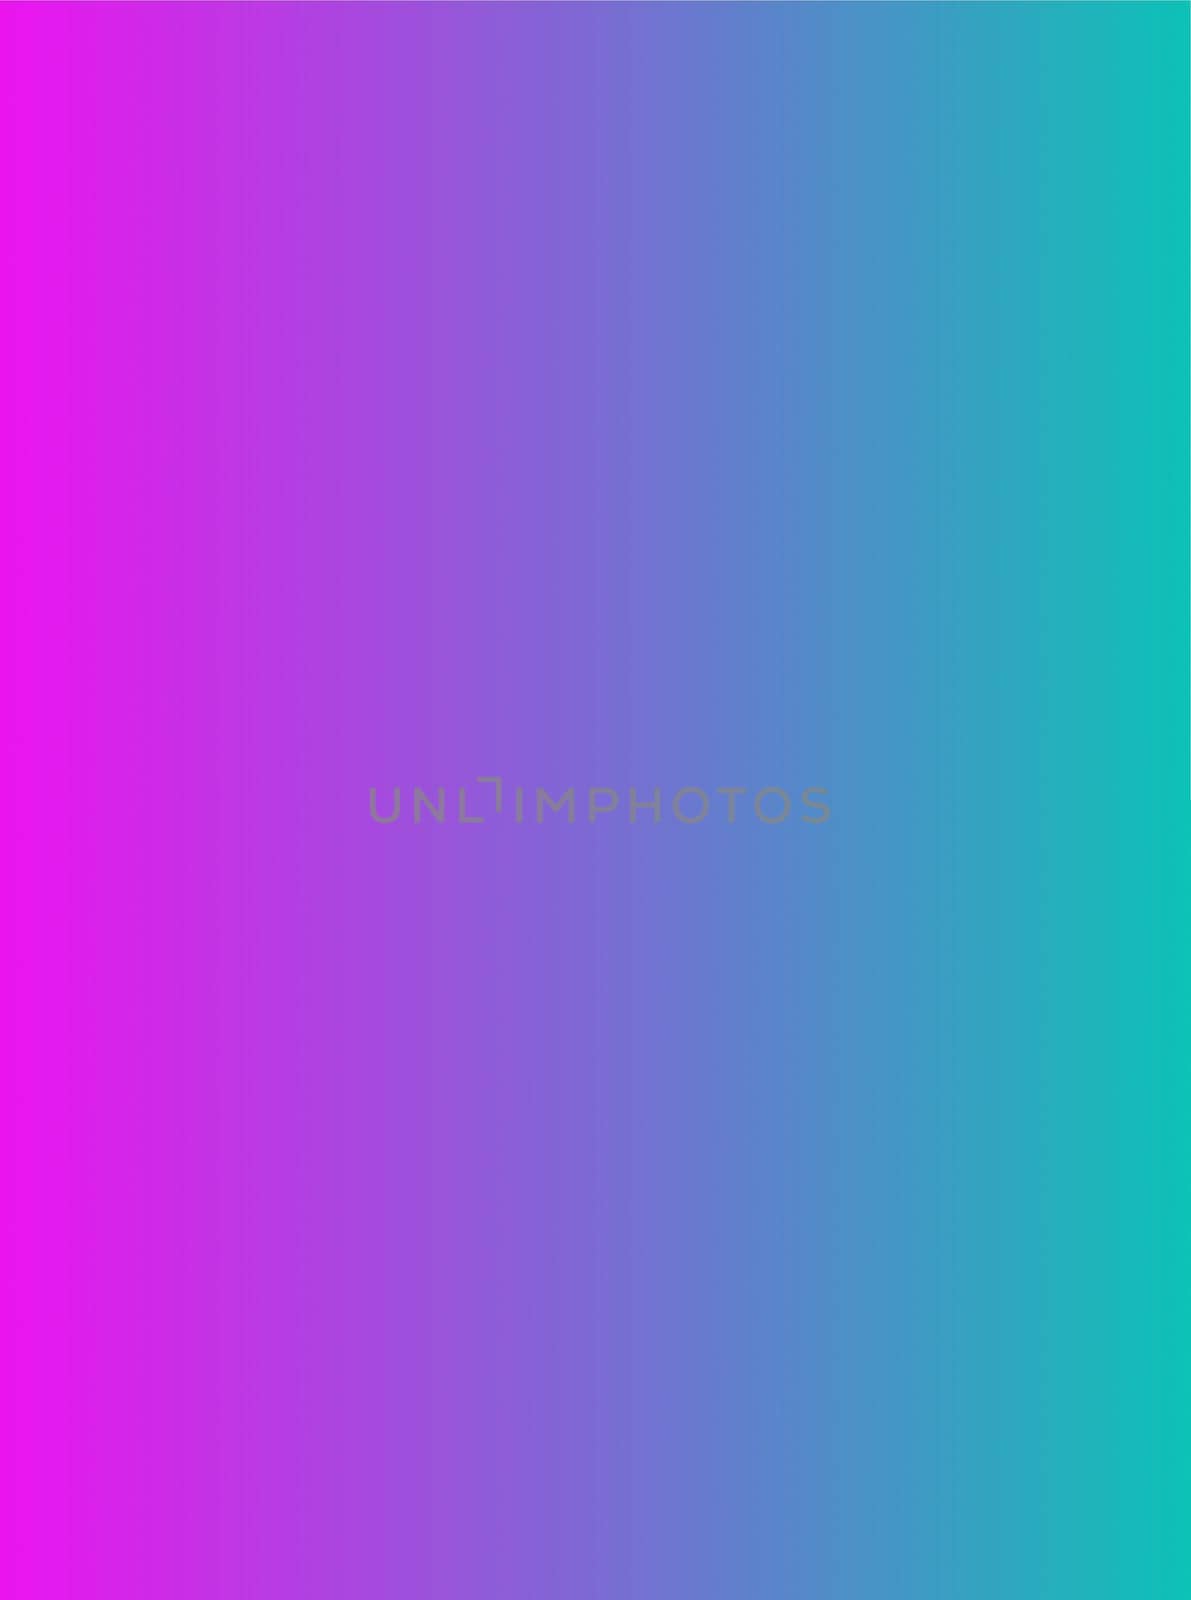 Blue pink colorful smooth gradient background illustration.